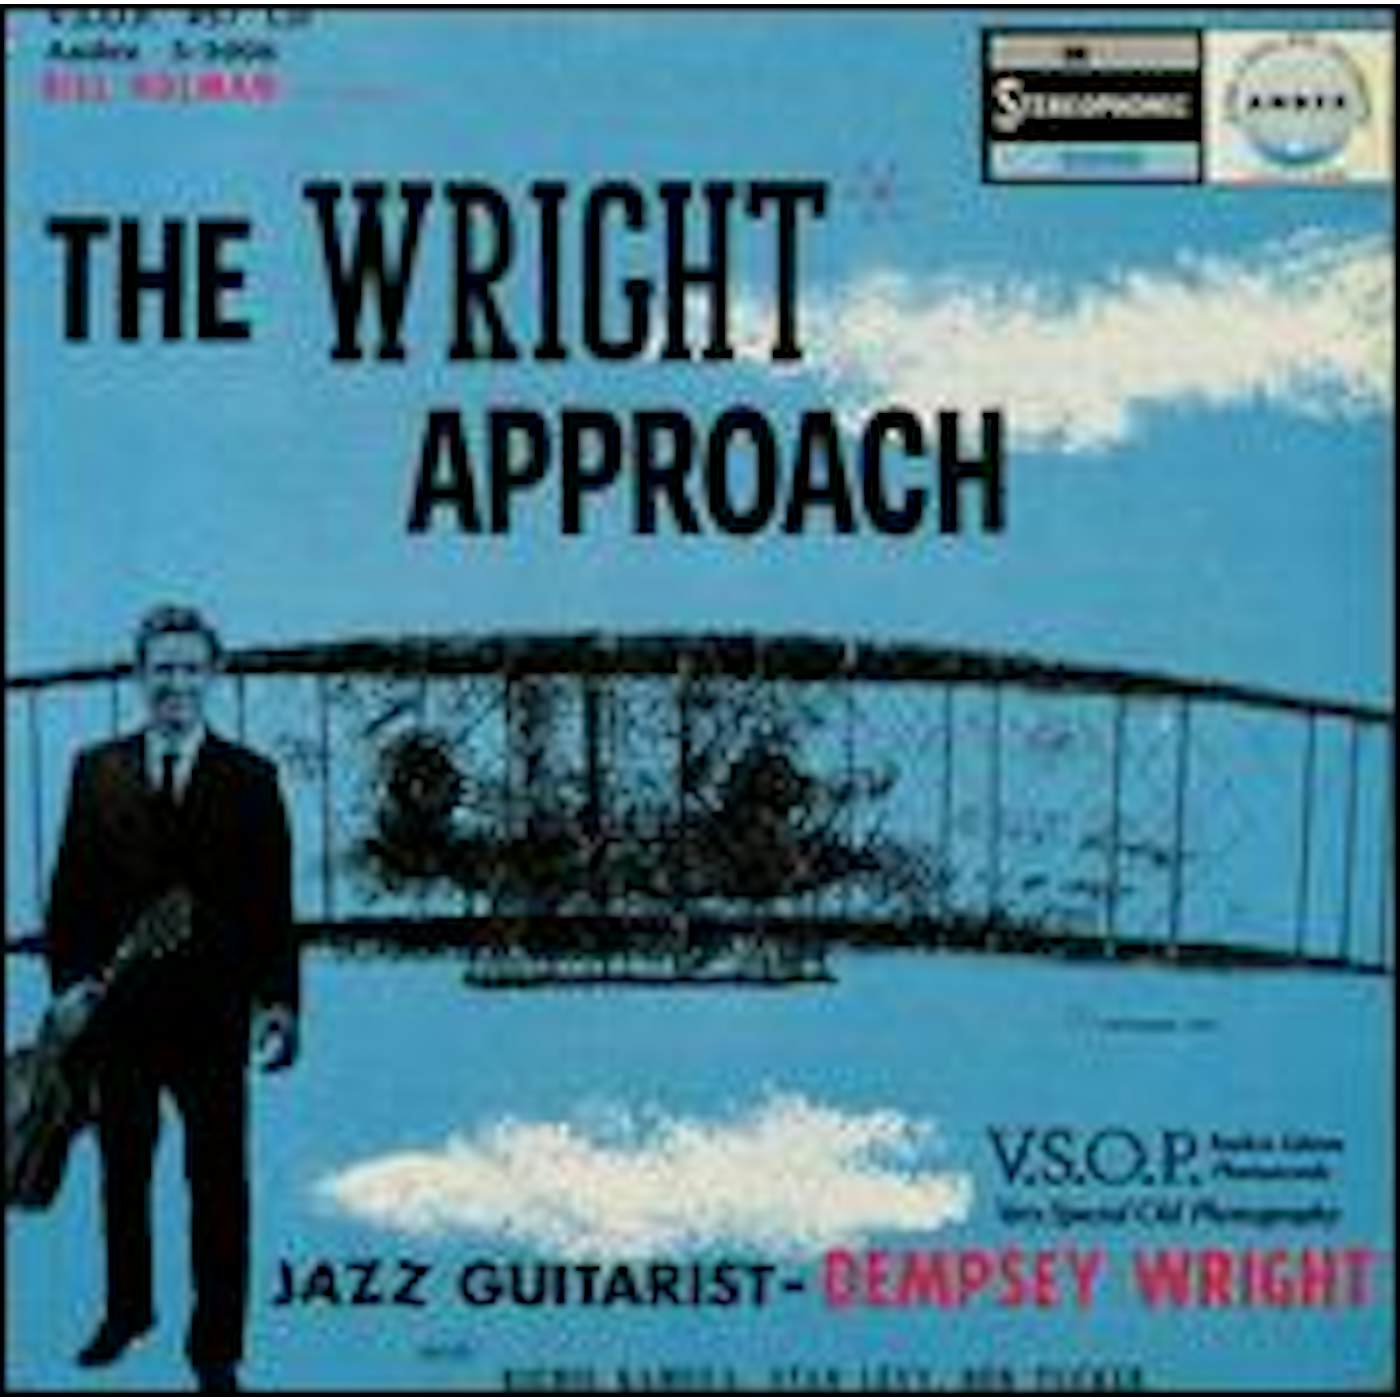 Dempsey Wright WRIGHT APPROACH CD